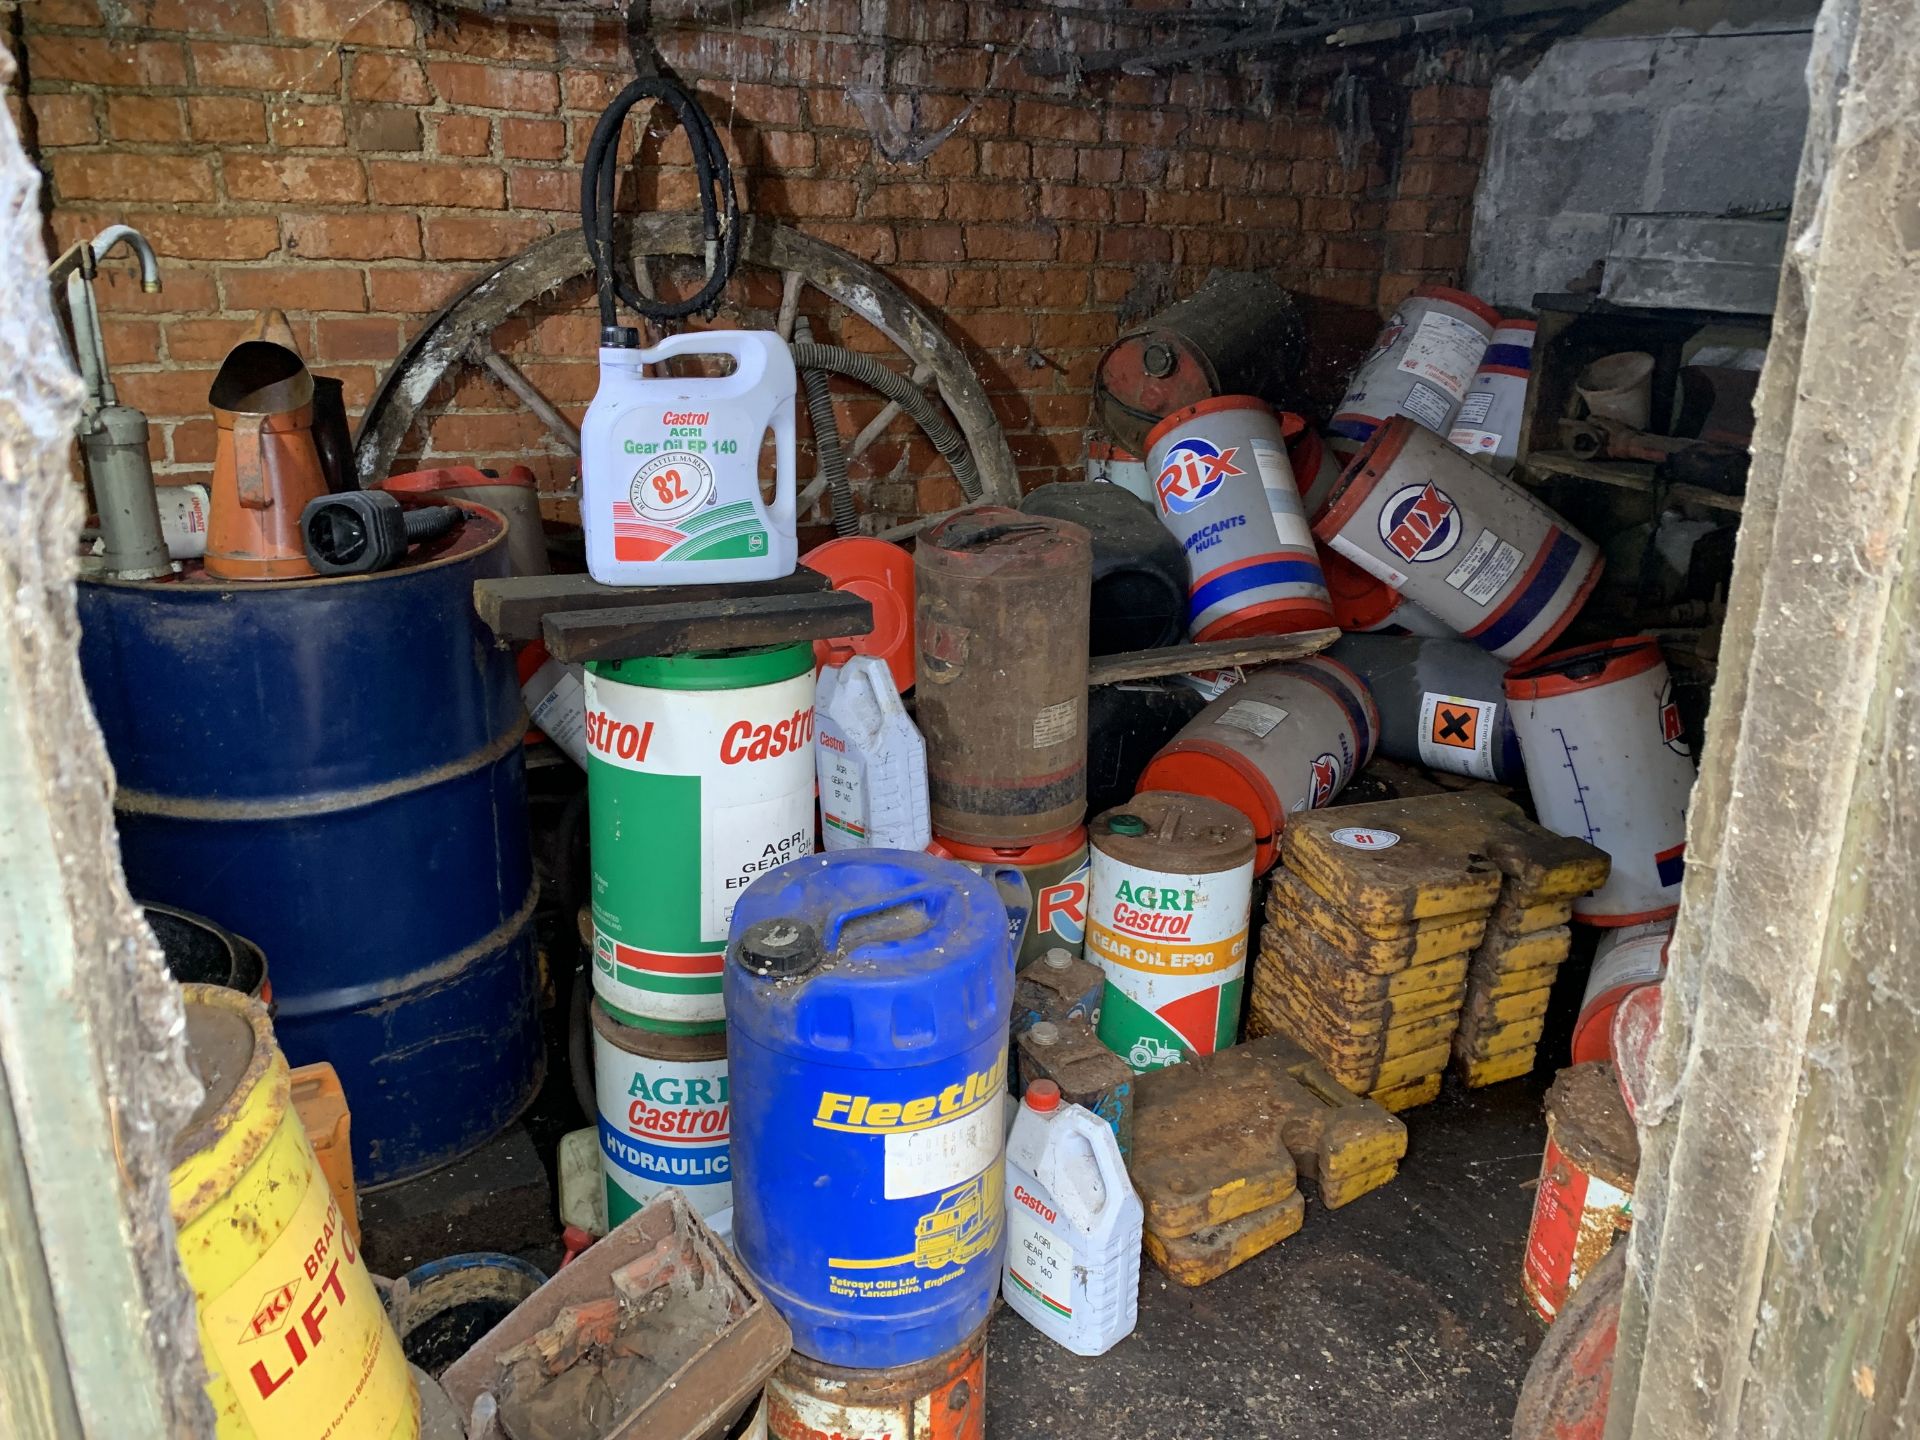 Contents of shed excluding tractor weights, mainly oils & fluids & containers